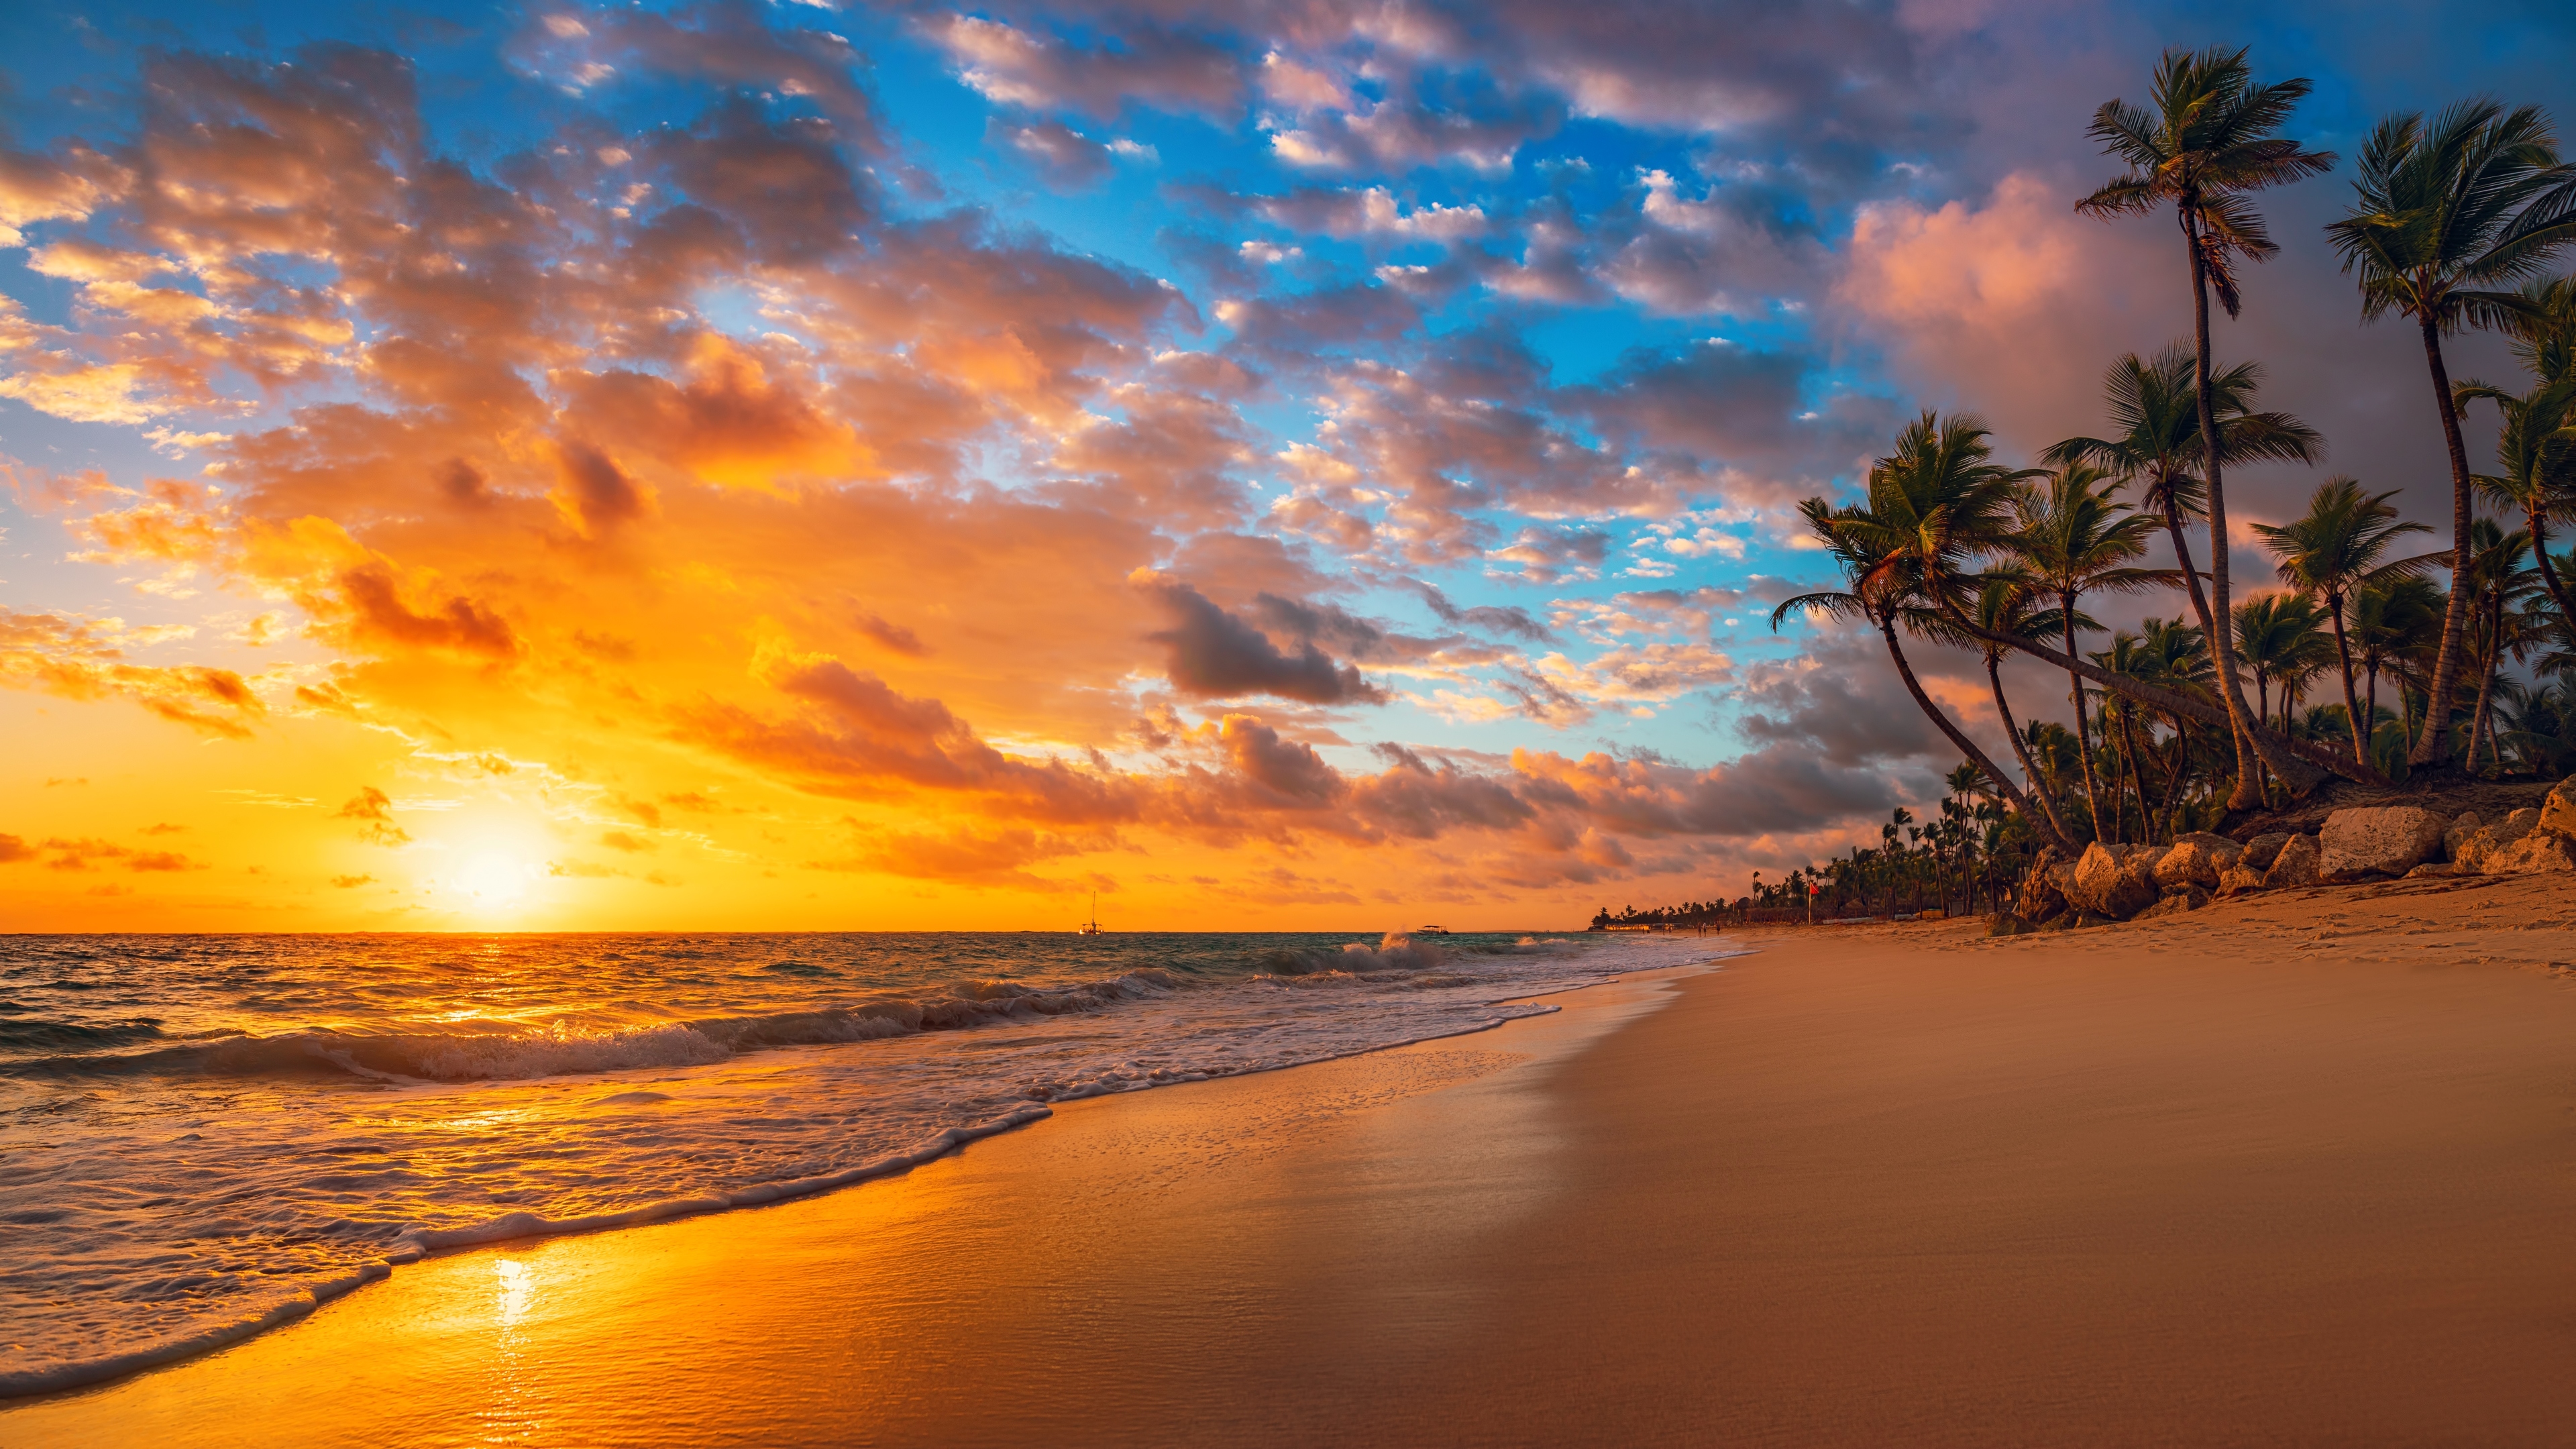 General 3840x2160 beach sea nature sunset waves sky clouds palm trees tropic island landscape water